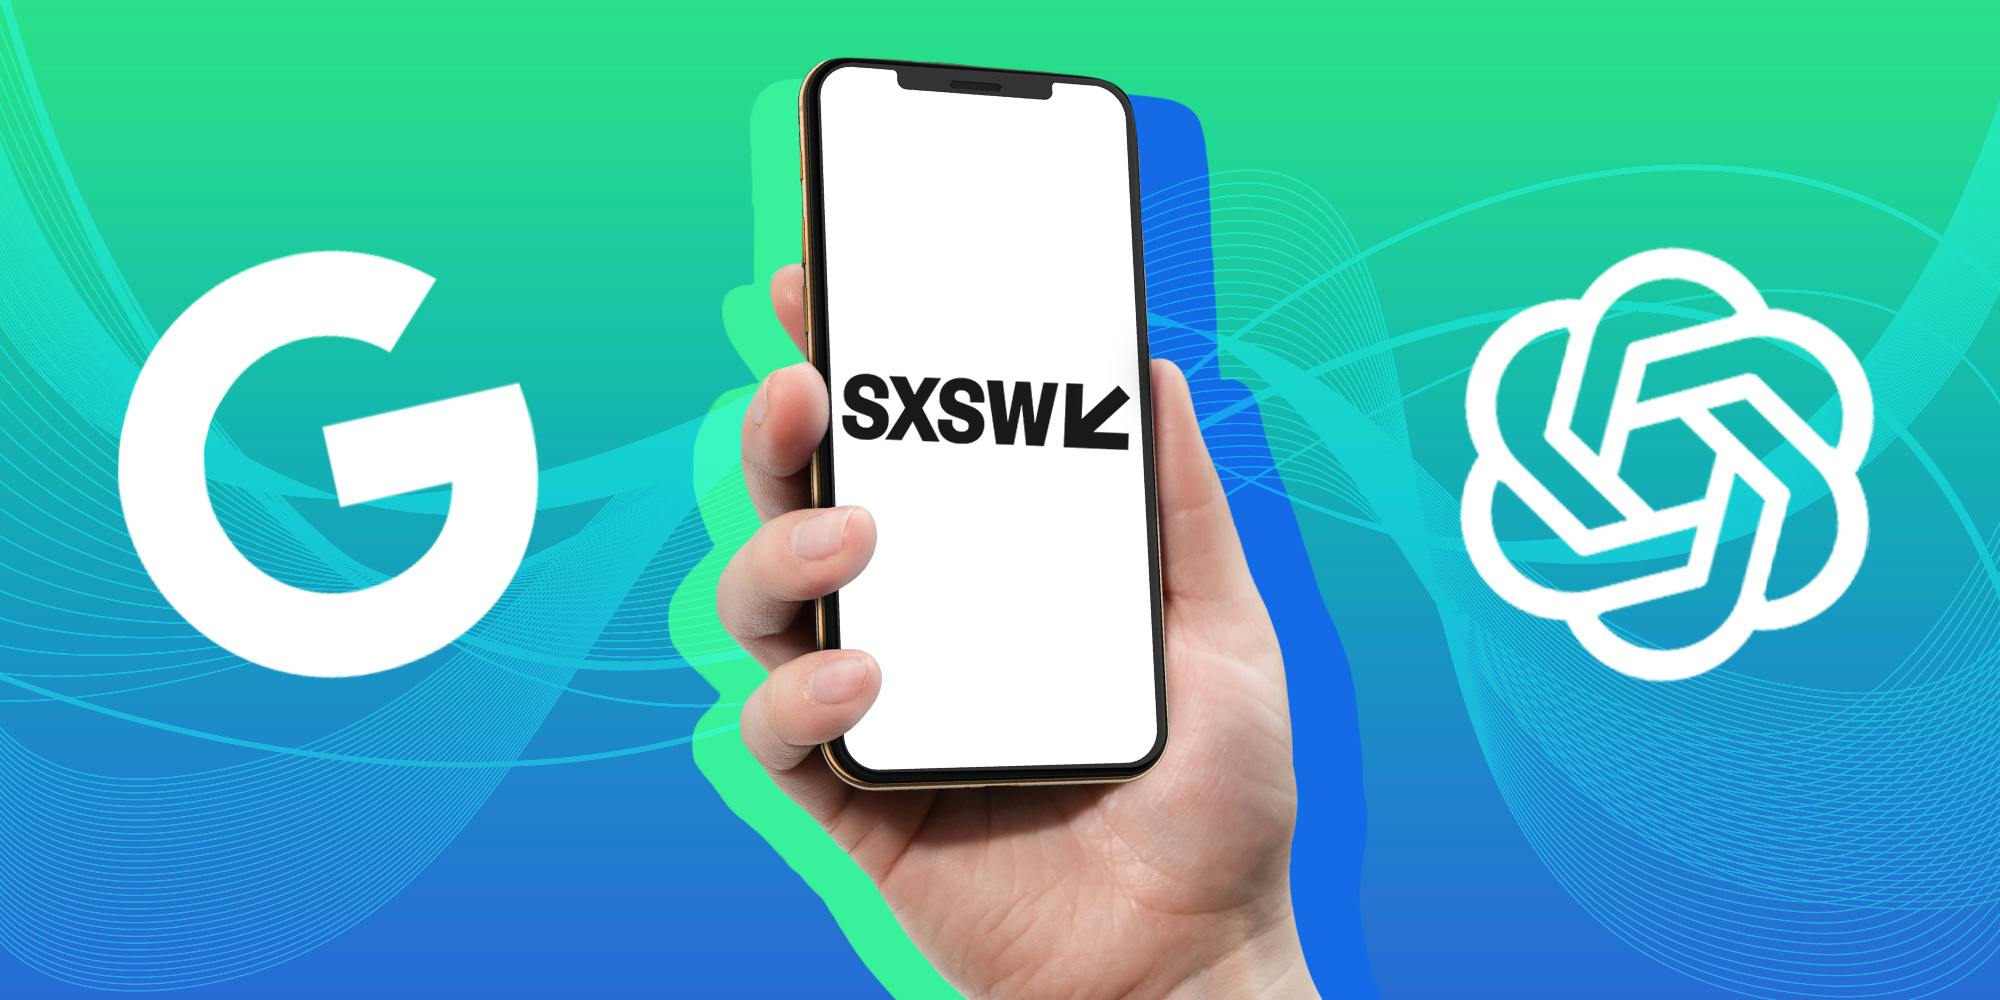 From Accessibility Efforts to Ethical Concerns, Here Are Our AI Takeaways From SXSW Content Creators Should Consider